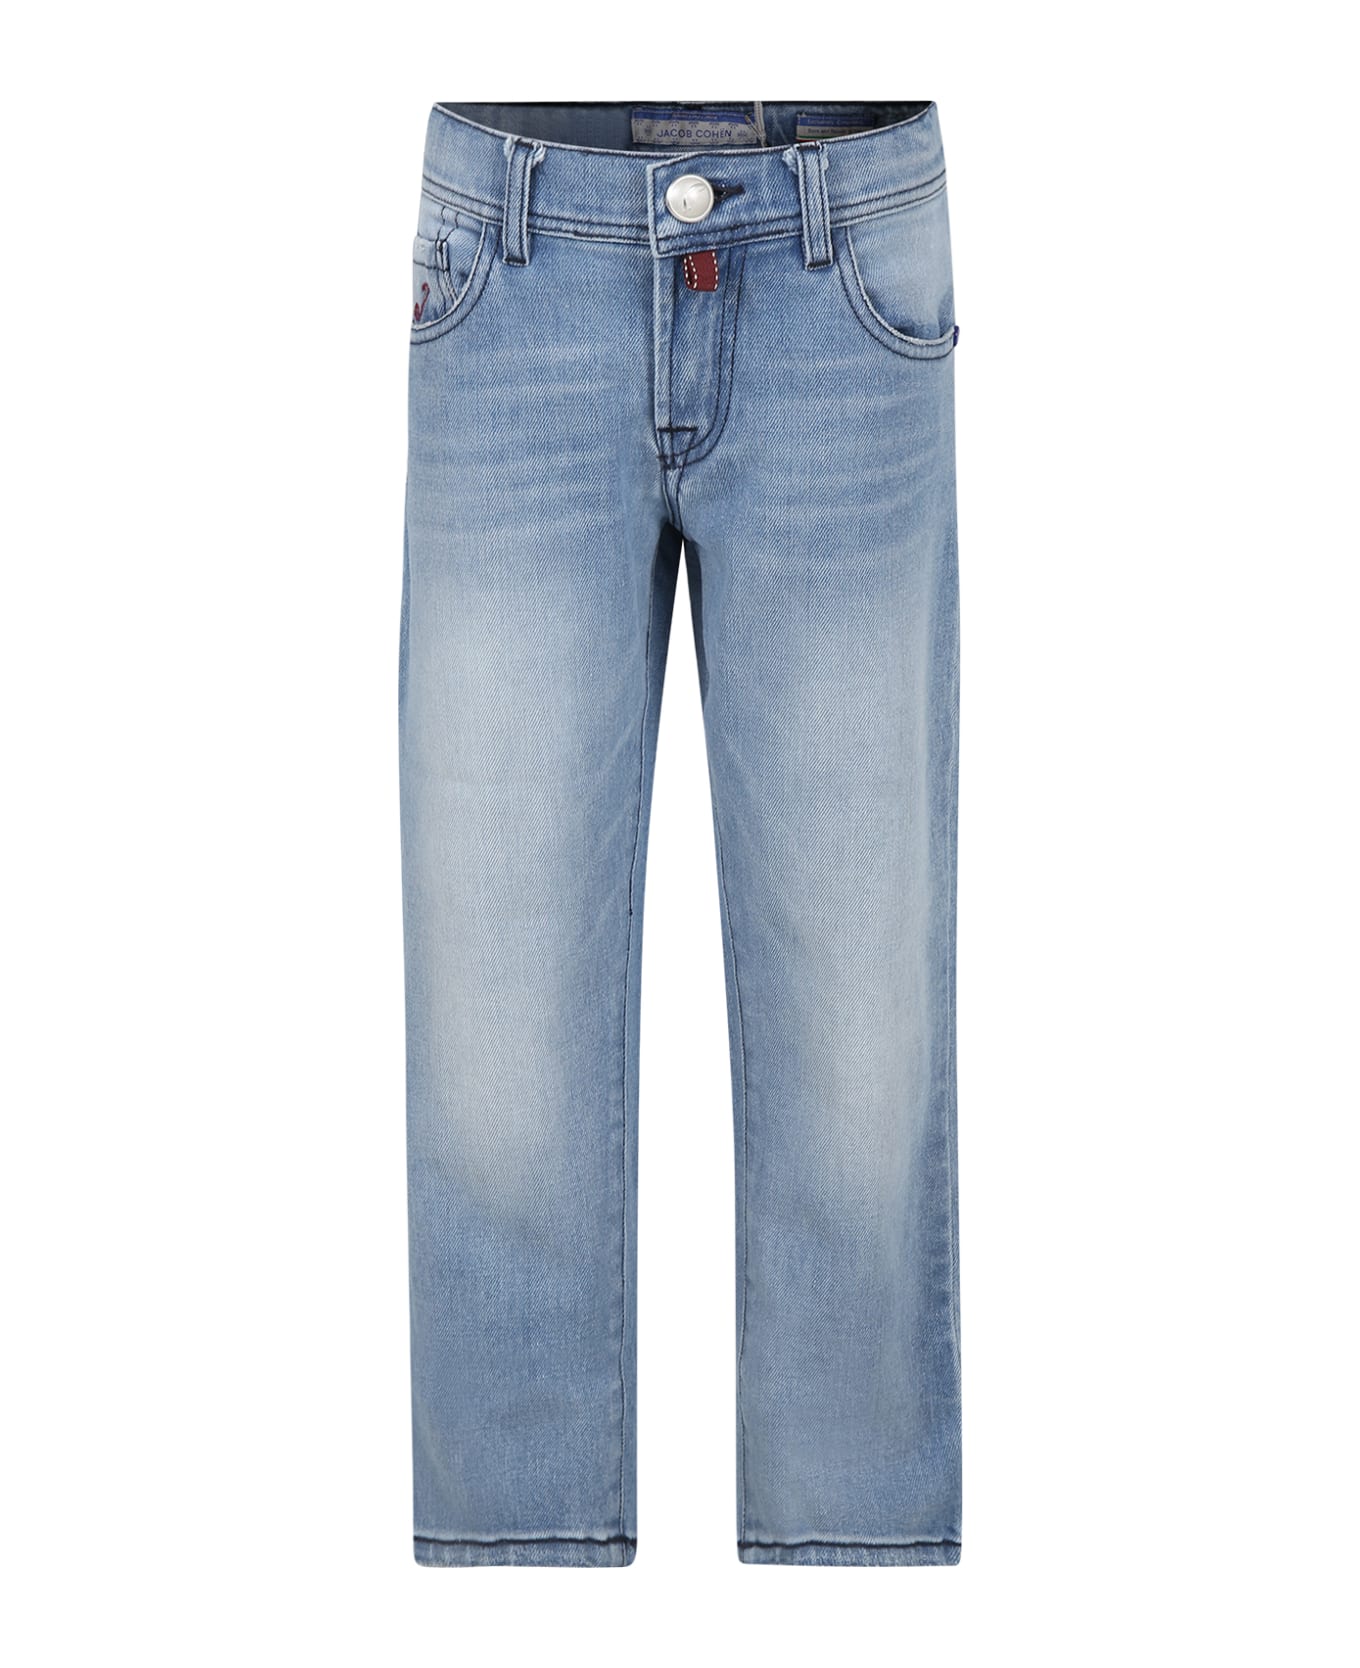 Jacob Cohen Blue Jeans For Boy With Logo - Denim ボトムス